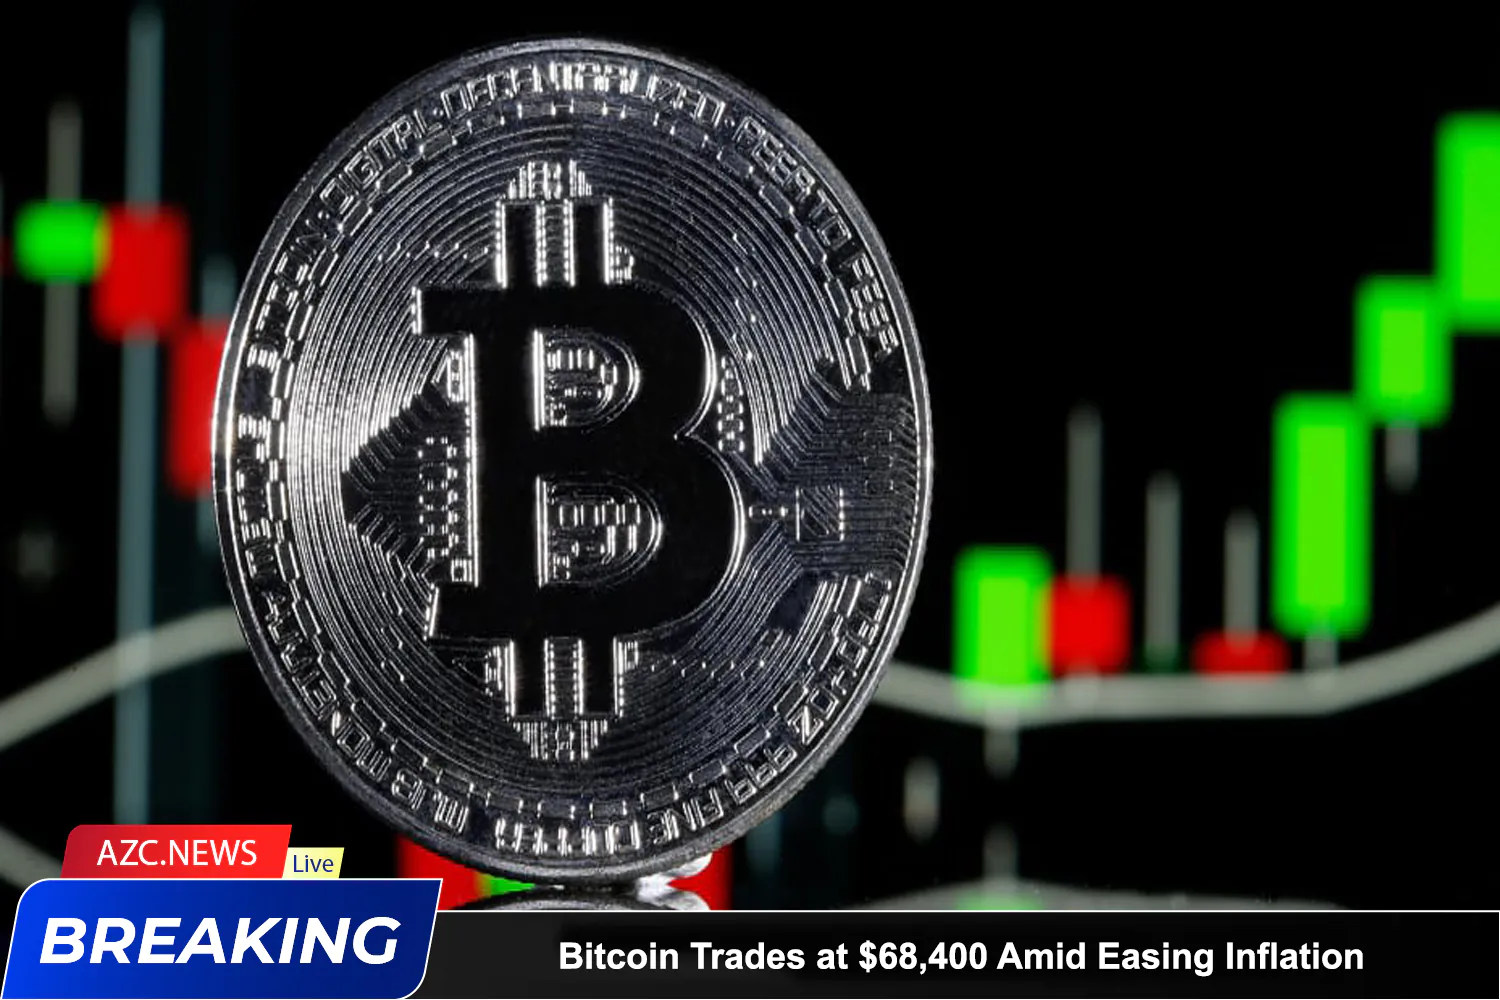 Azcnews Bitcoin Trades At $68,400 Amid Easing Inflation